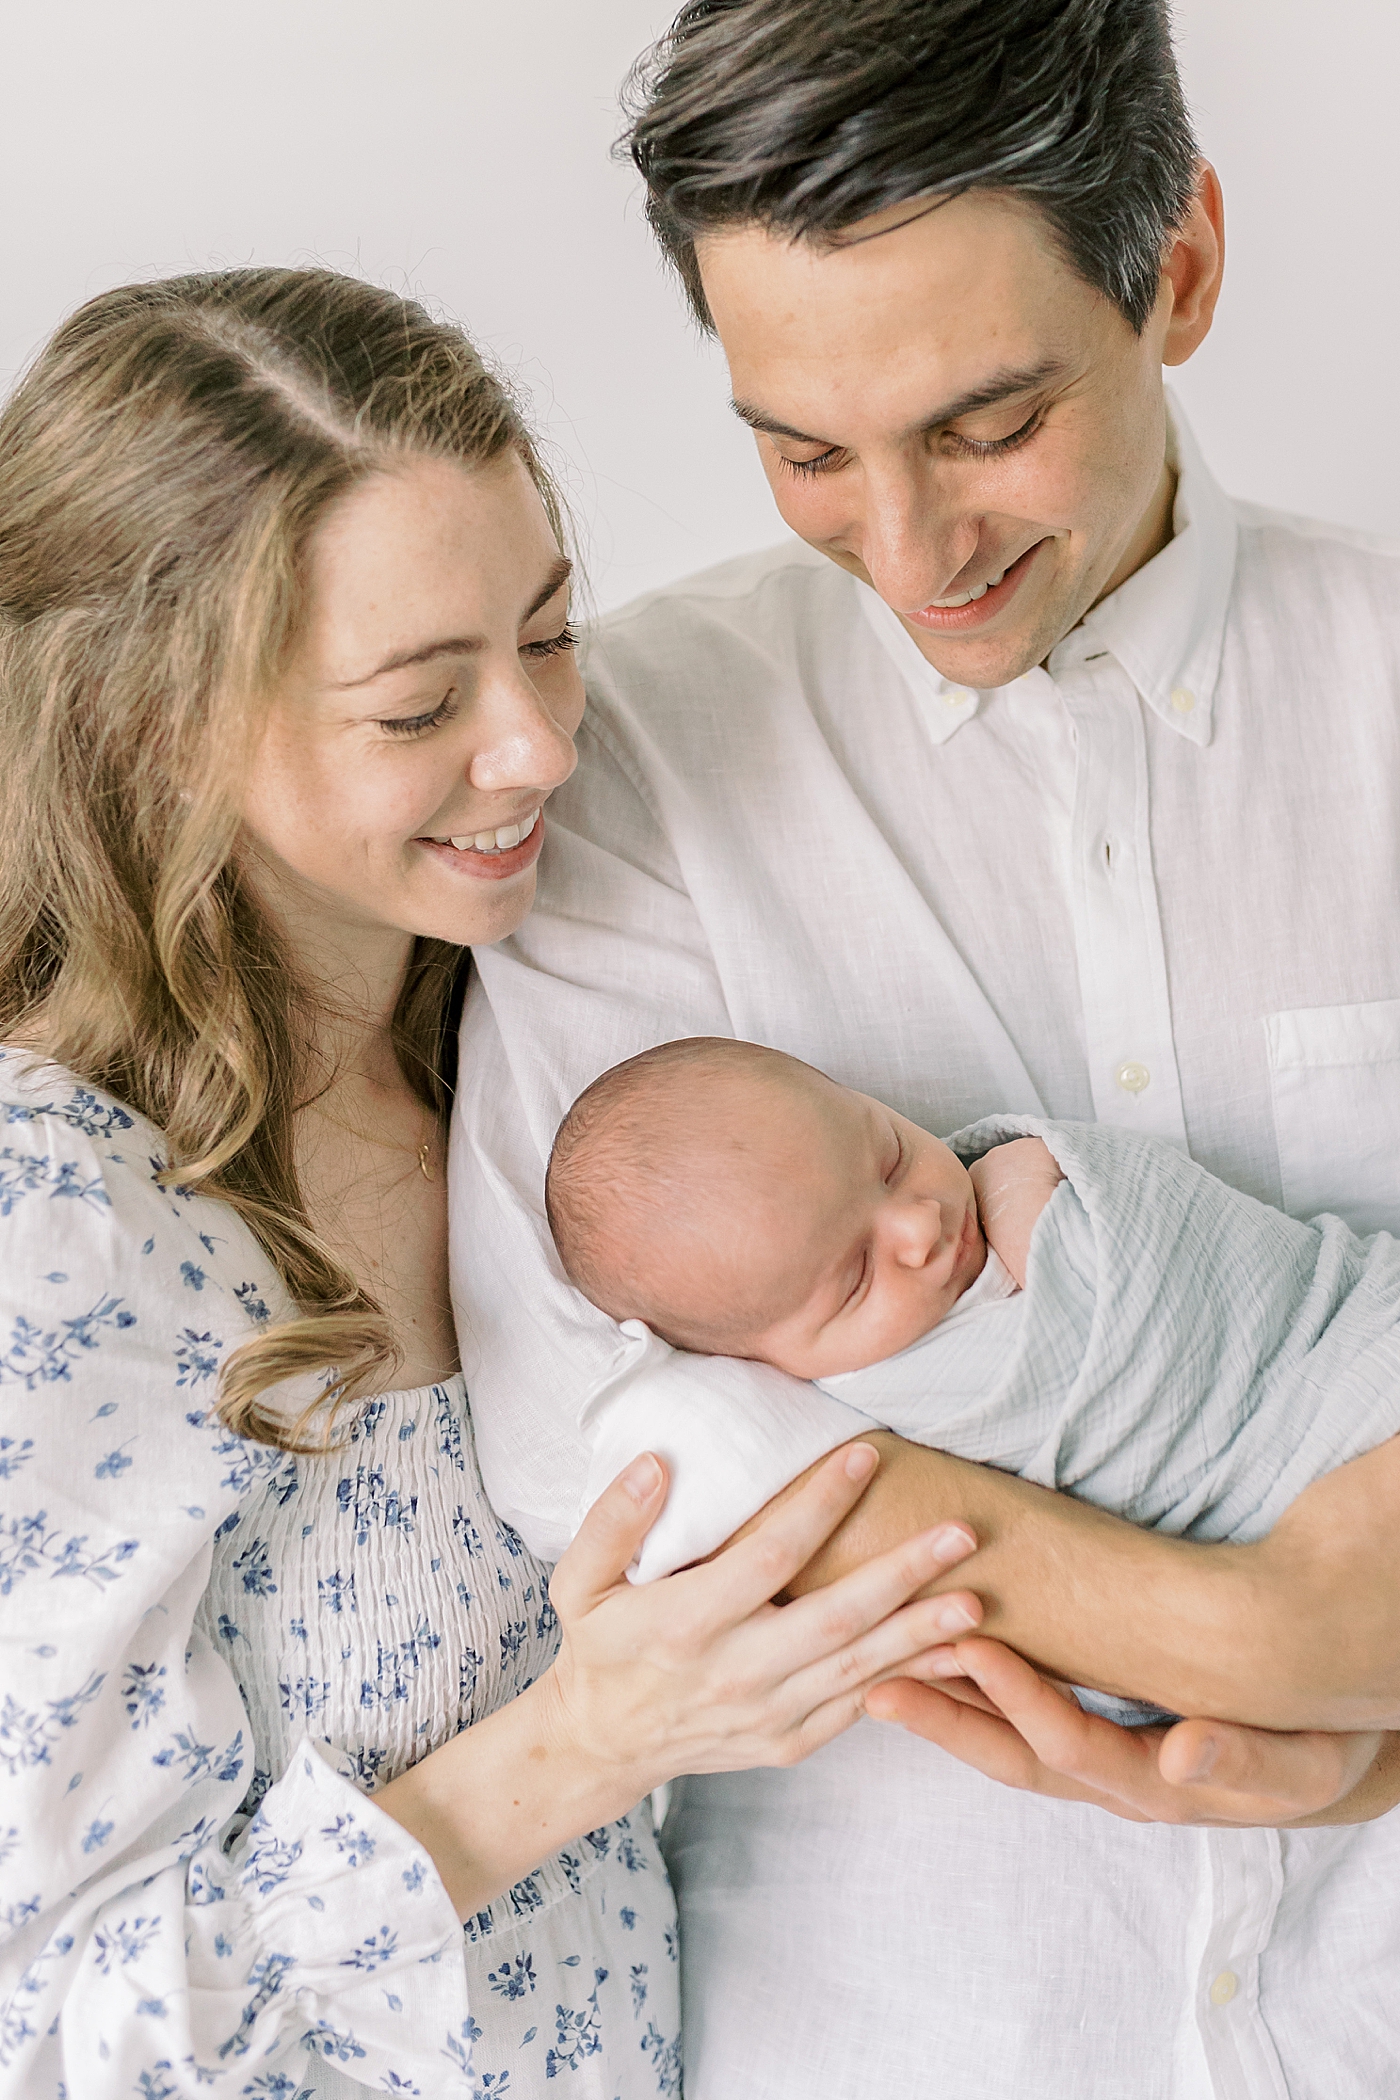 Detail of mom and dad holding their newborn baby and smiling | Image by Caitlyn Motycka